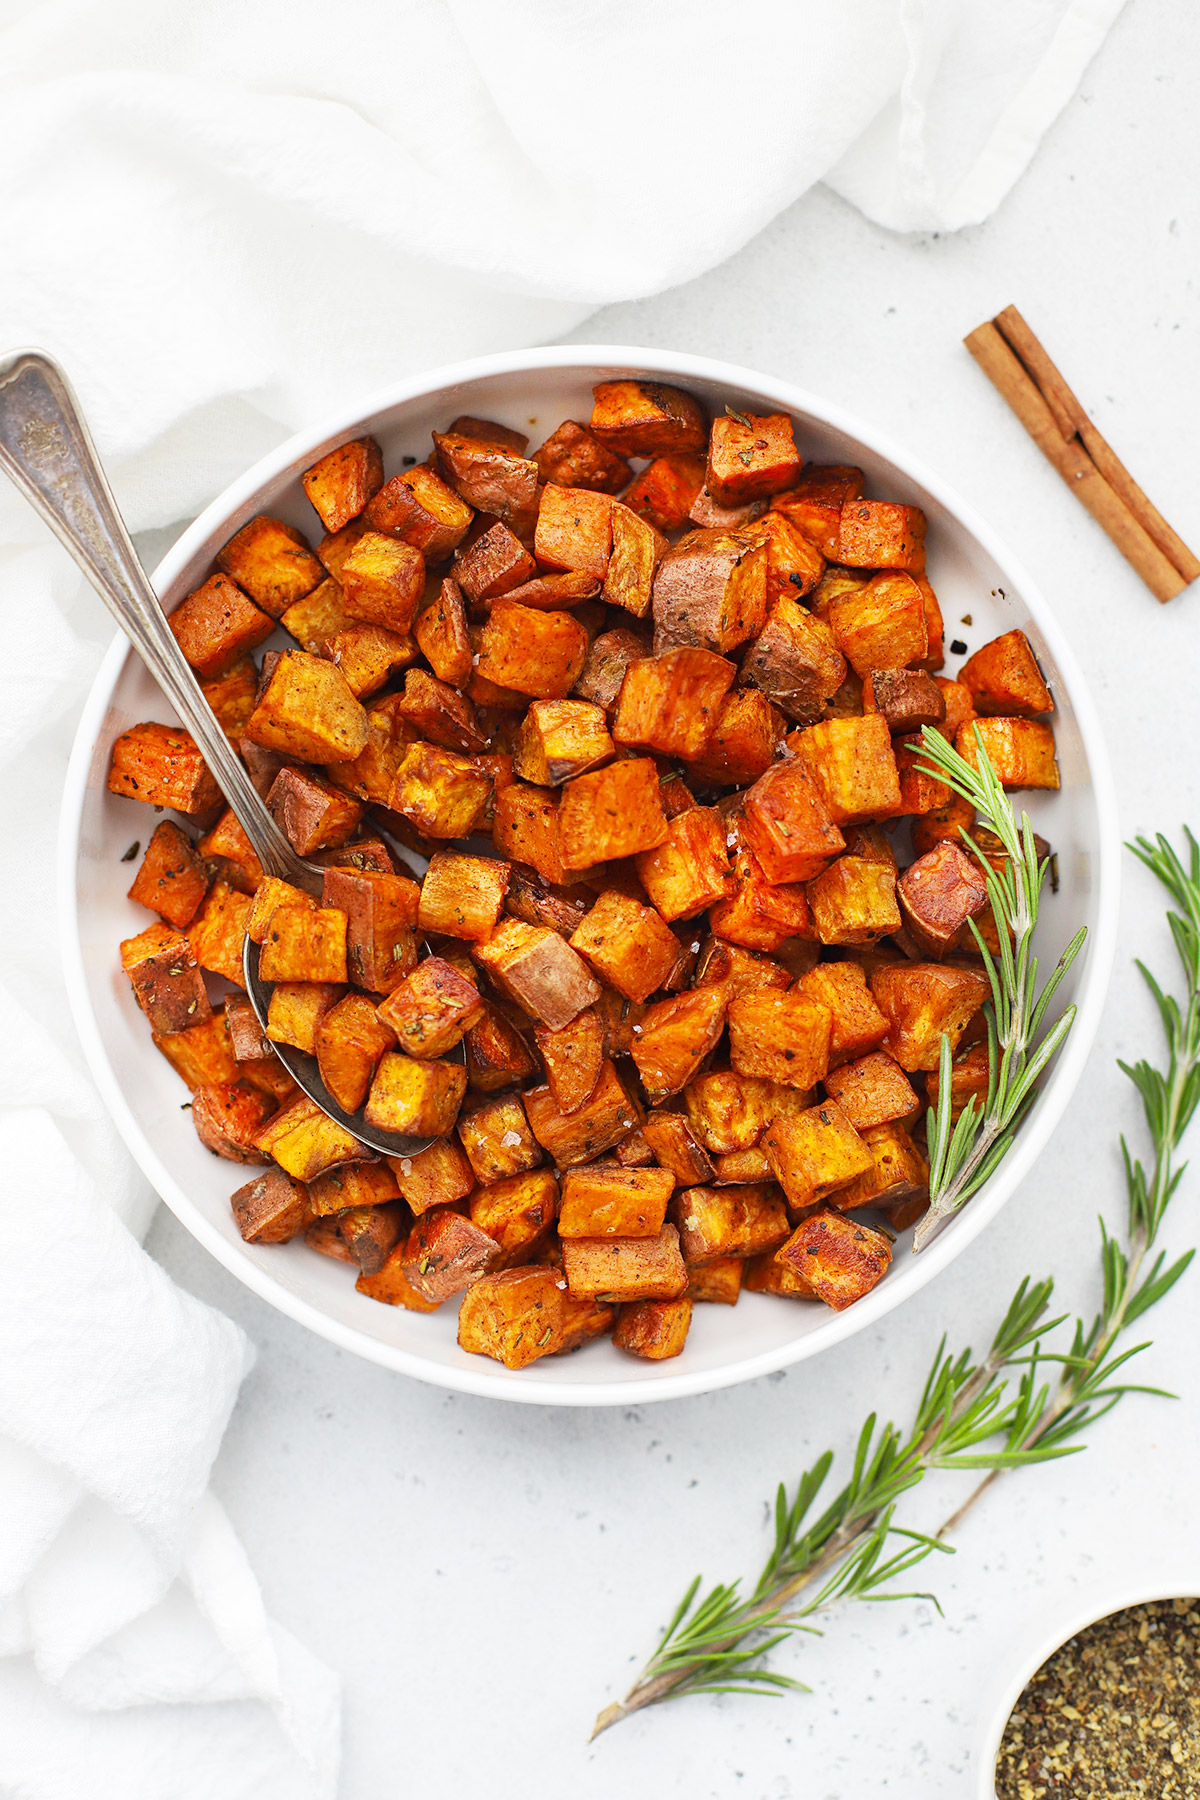 Overhead view of Cinnamon Rosemary Sweet Potatoes in a white bowl on a white background